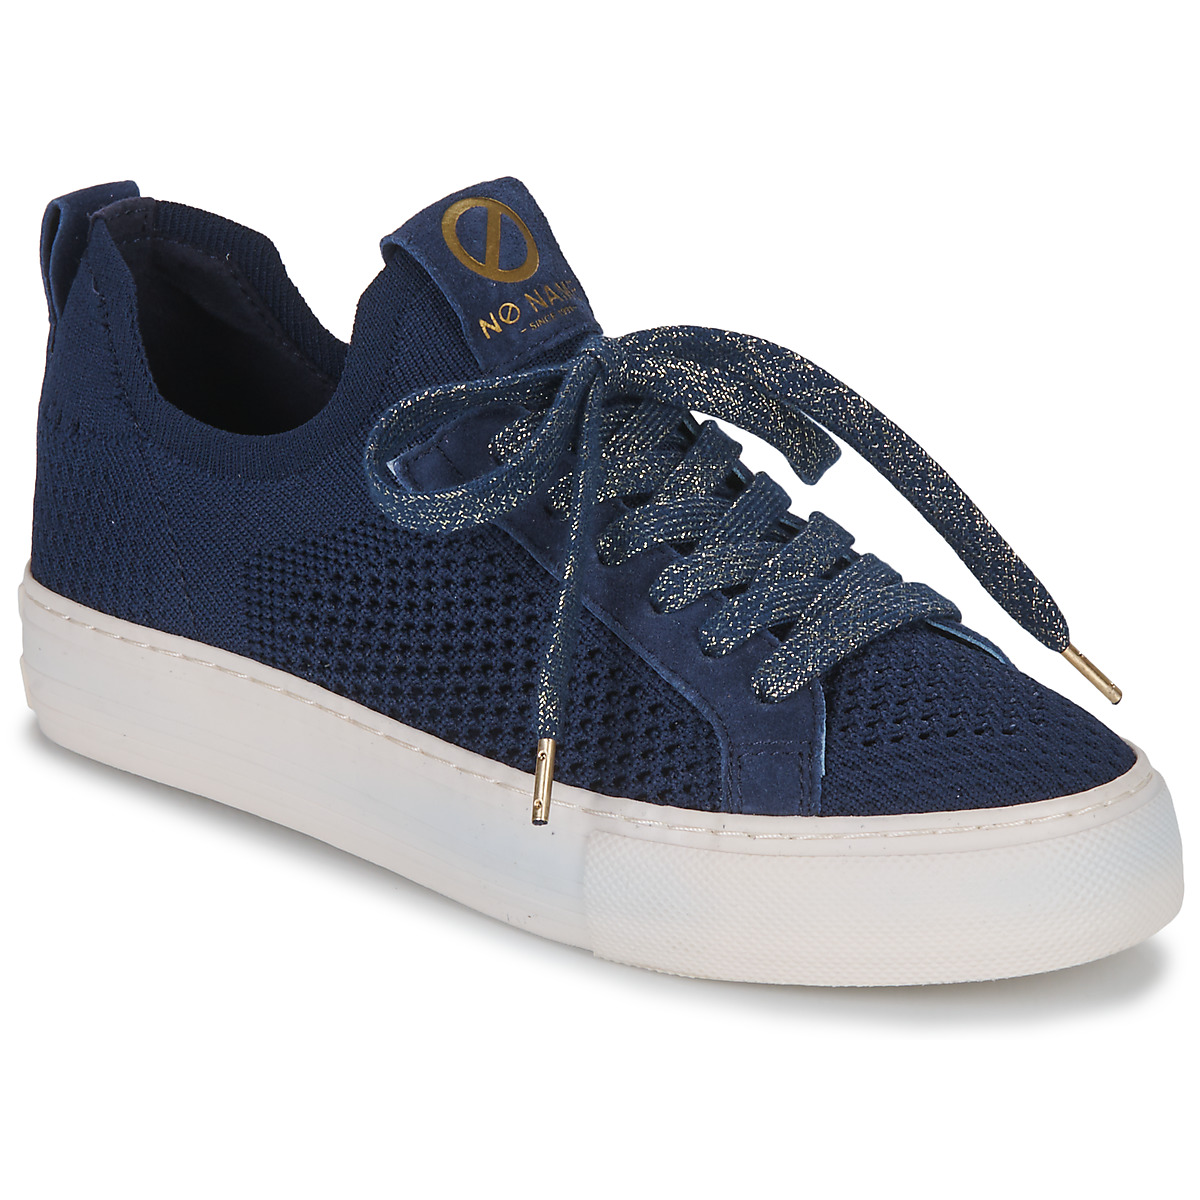 Scarpe Donna Sneakers basse No Name ARCADE FLY Marine